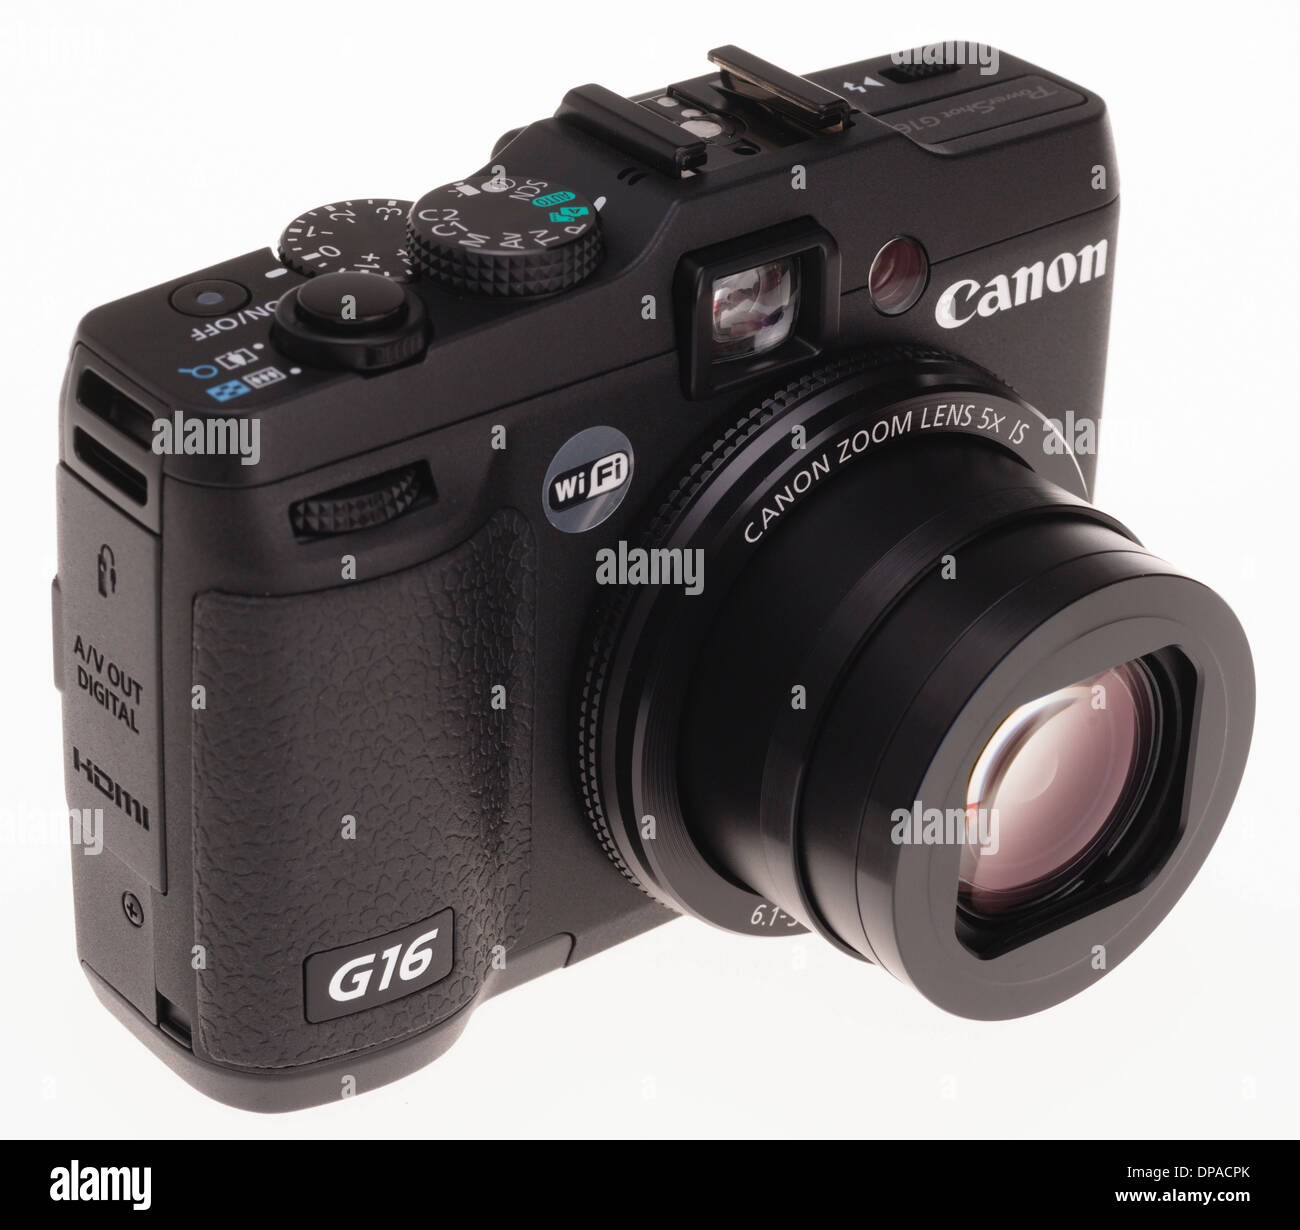 Digital photography equipment - Canon G16 compact camera with WiFi function  Stock Photo - Alamy